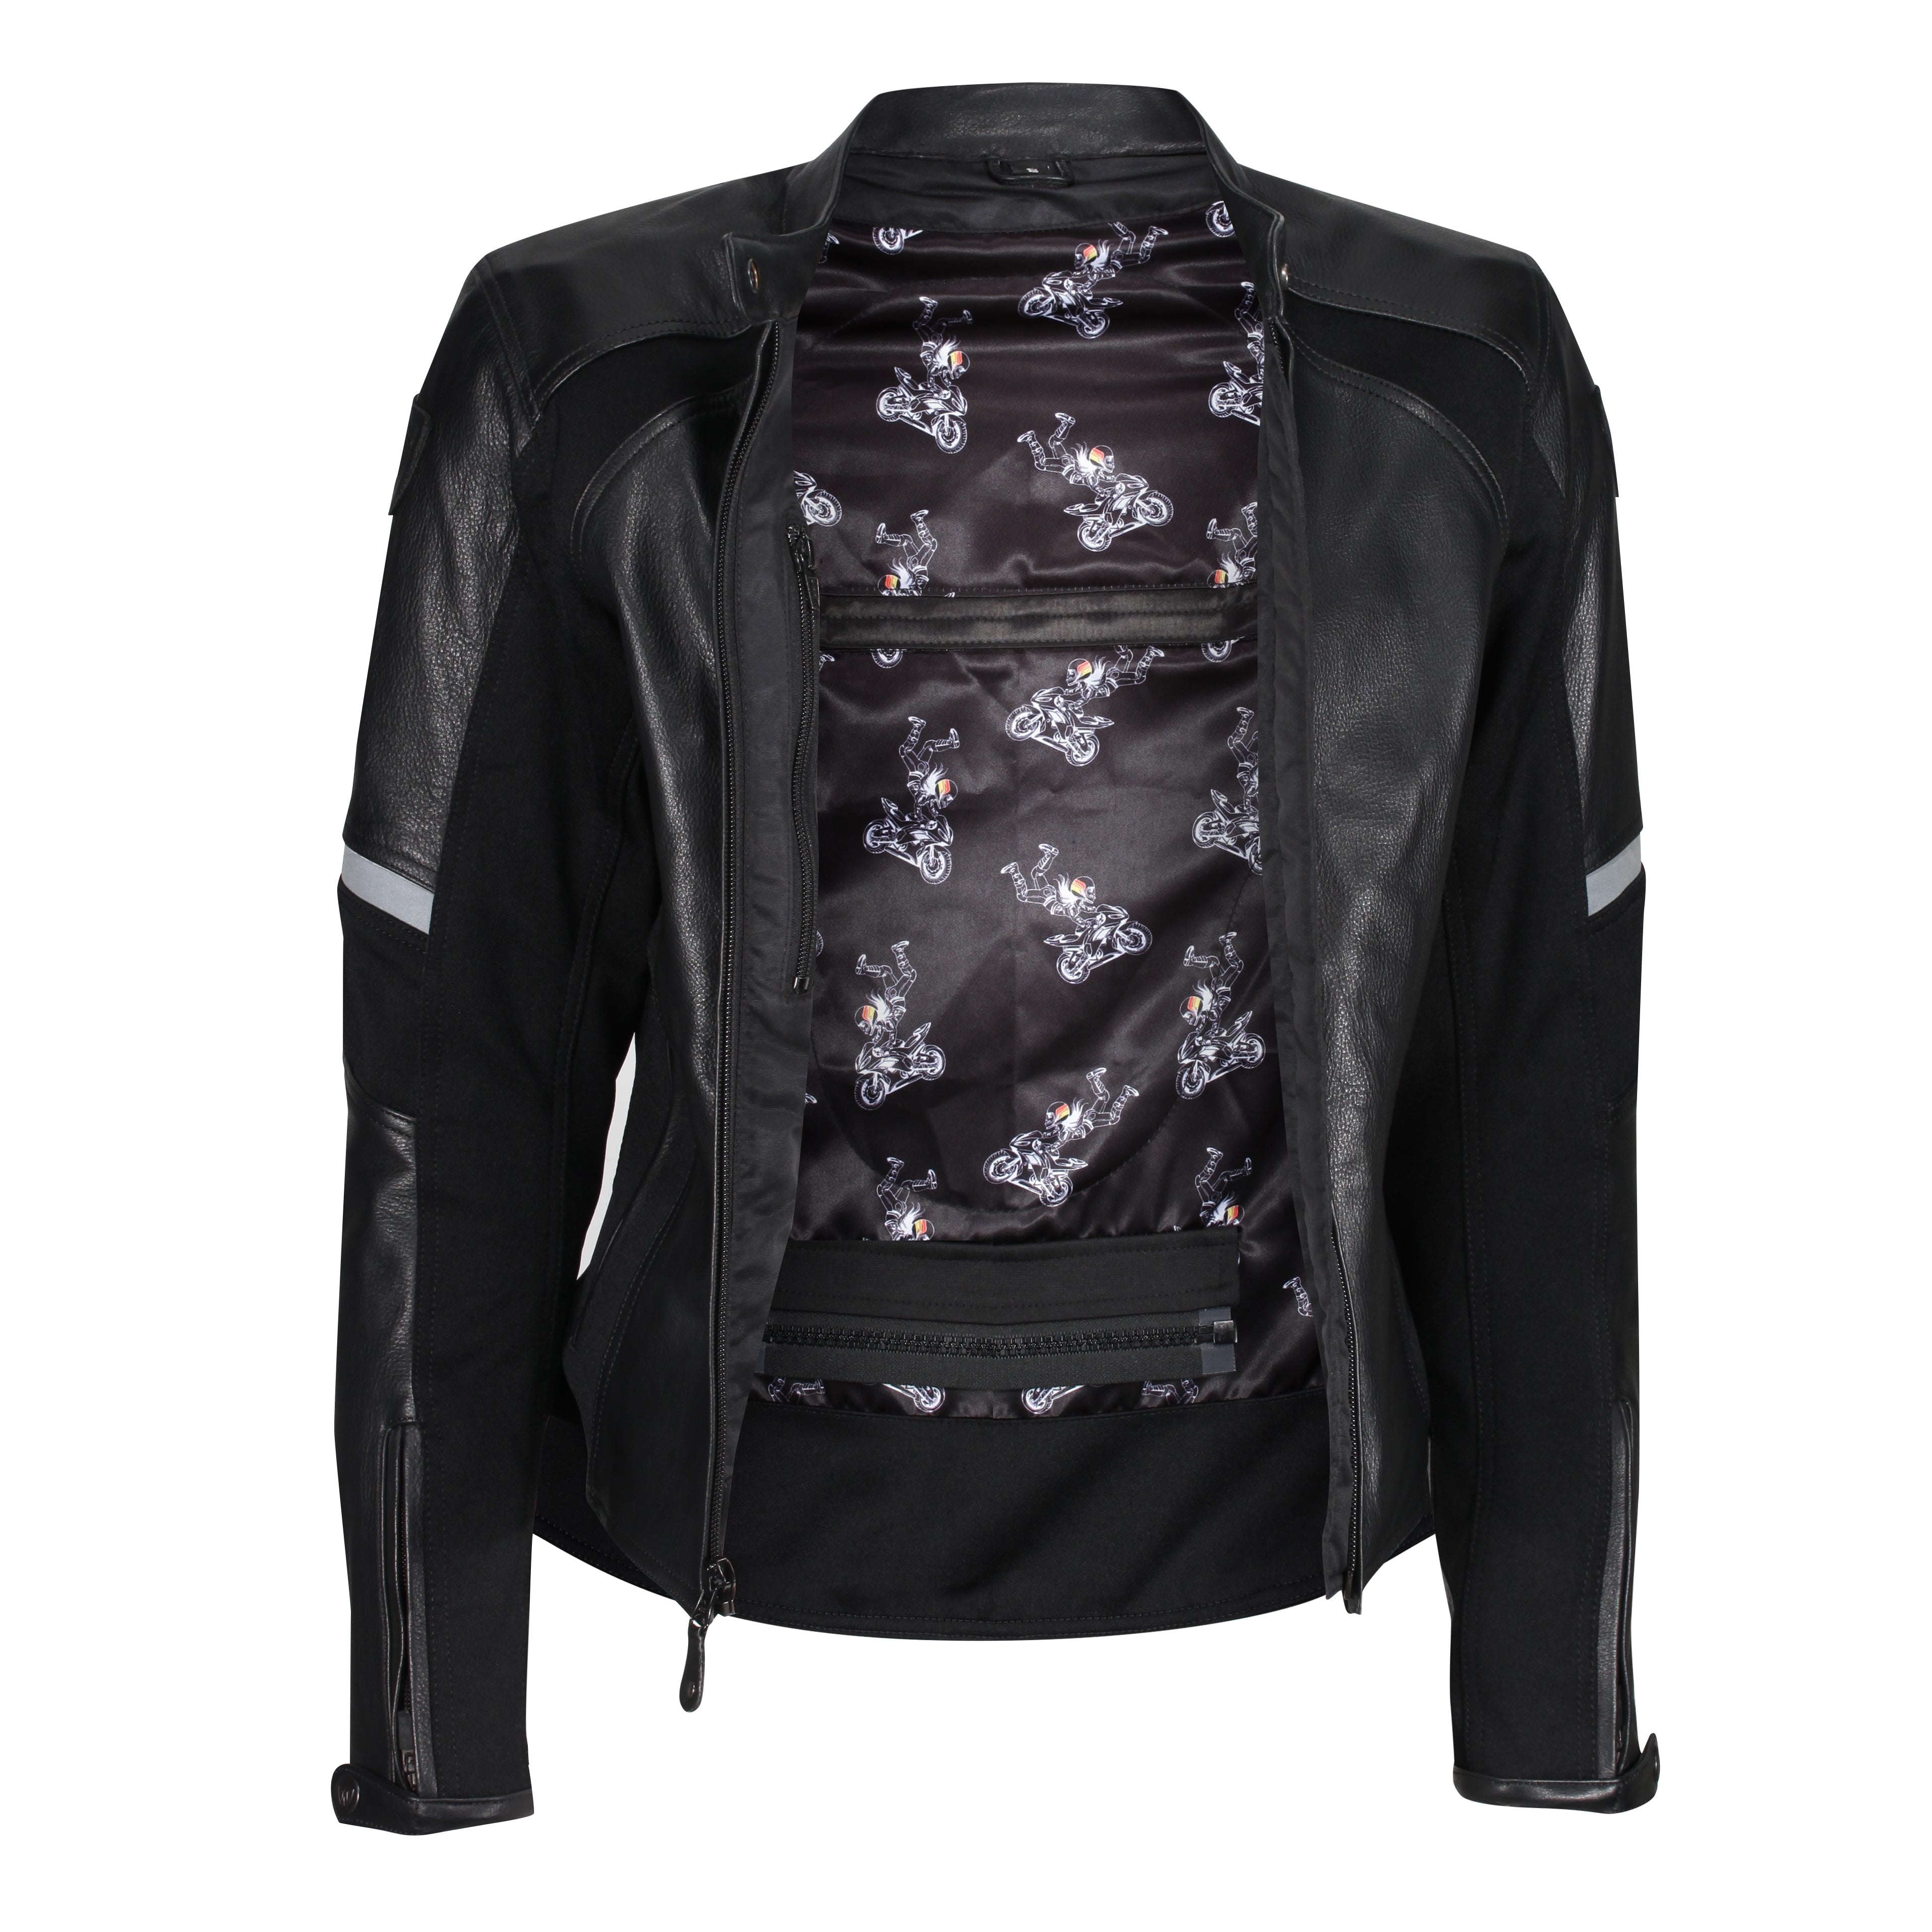 The inner part of the Black leather women&#39;s motorcycle jacket with reflectors from Moto Girl 